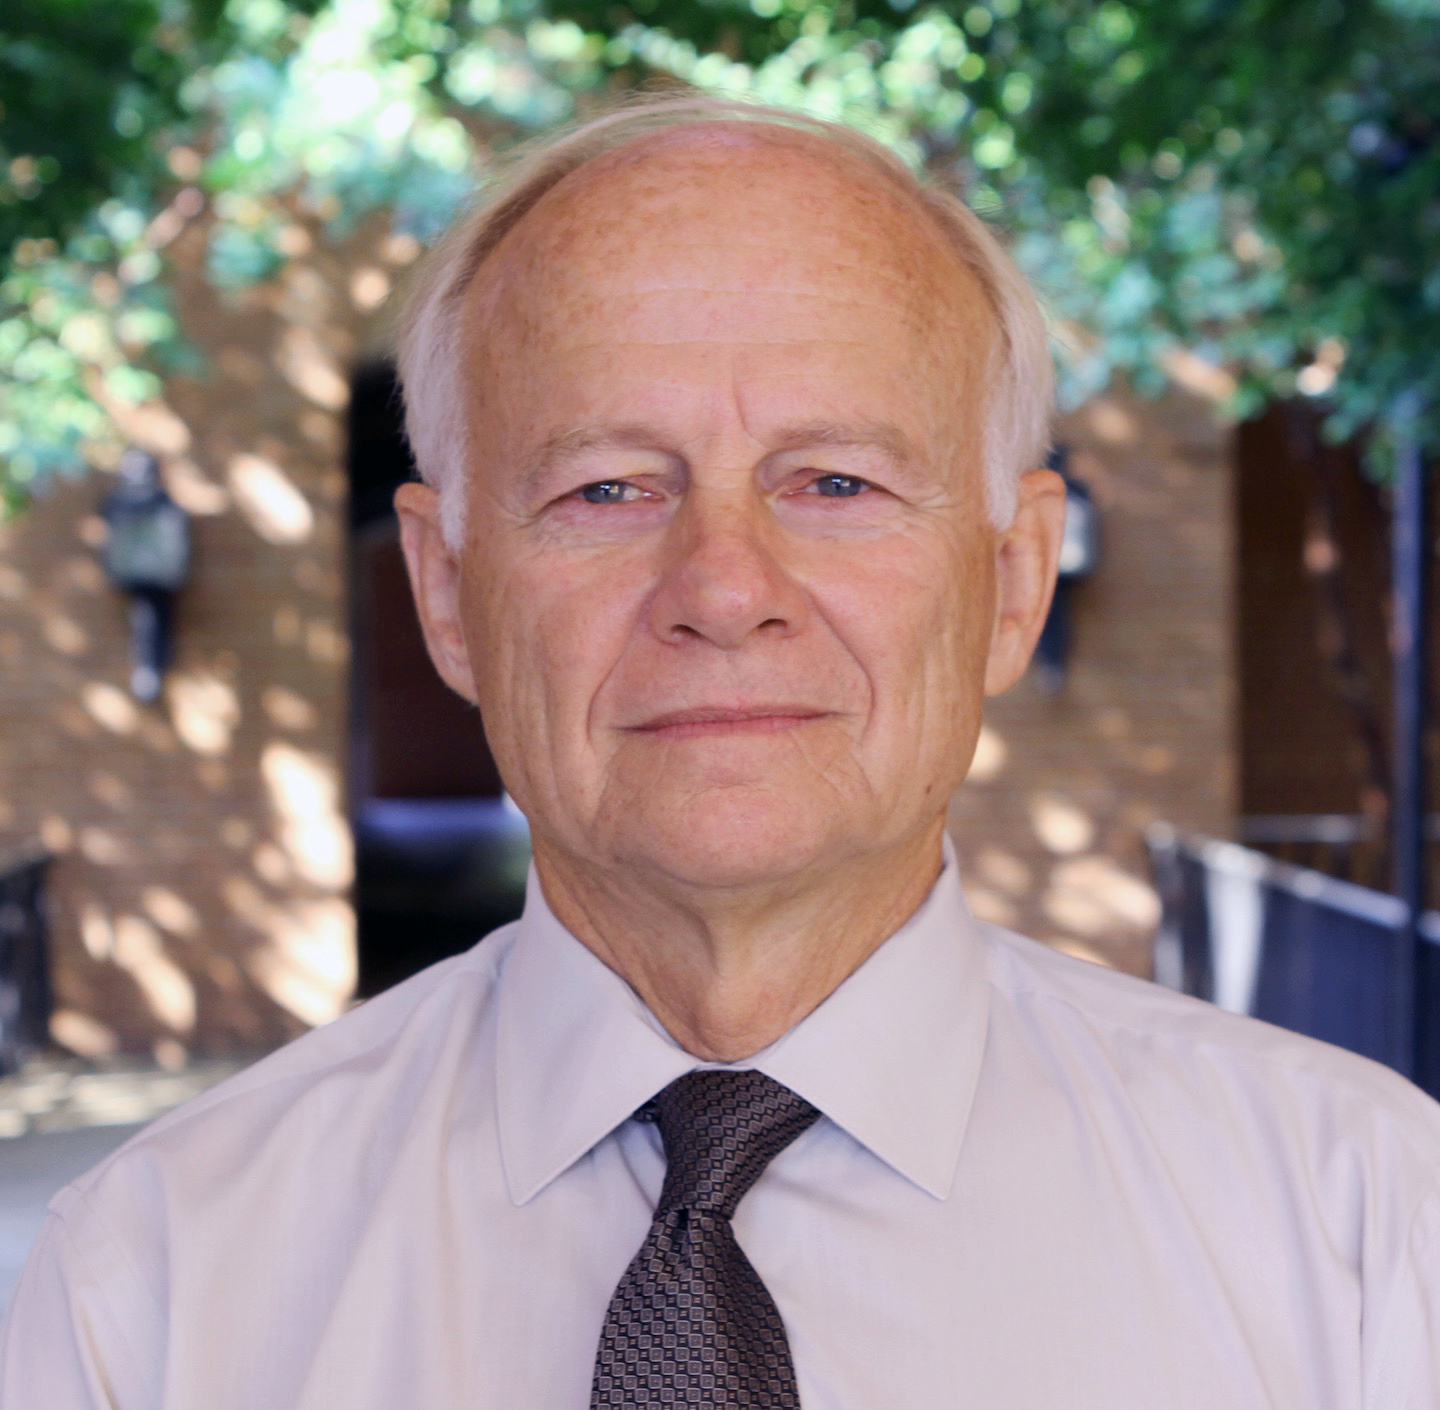 Lee Nordt, Ph.D., Dean of the School of Arts and Sciences